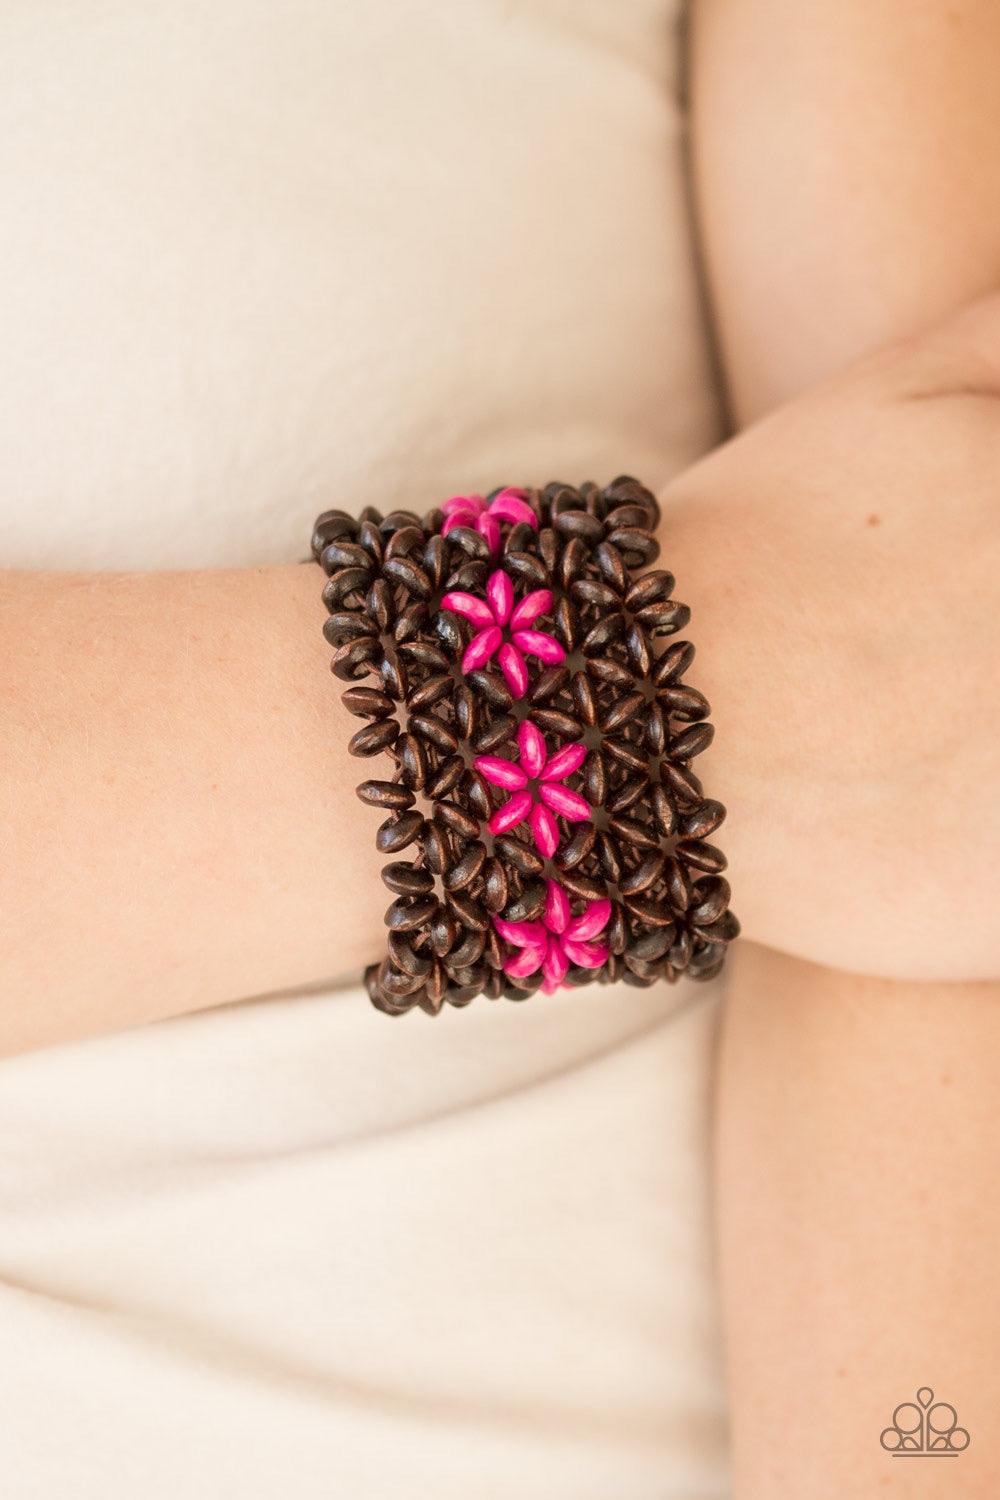 Paparazzi Accessories Bahama Babe - Pink Earthy wooden accents are threaded along elastic stretchy bands, creating an ornate bracelet. Tinted in a vivacious finish, pink wooden beads gather down the center, creating summery floral accents for a colorful f